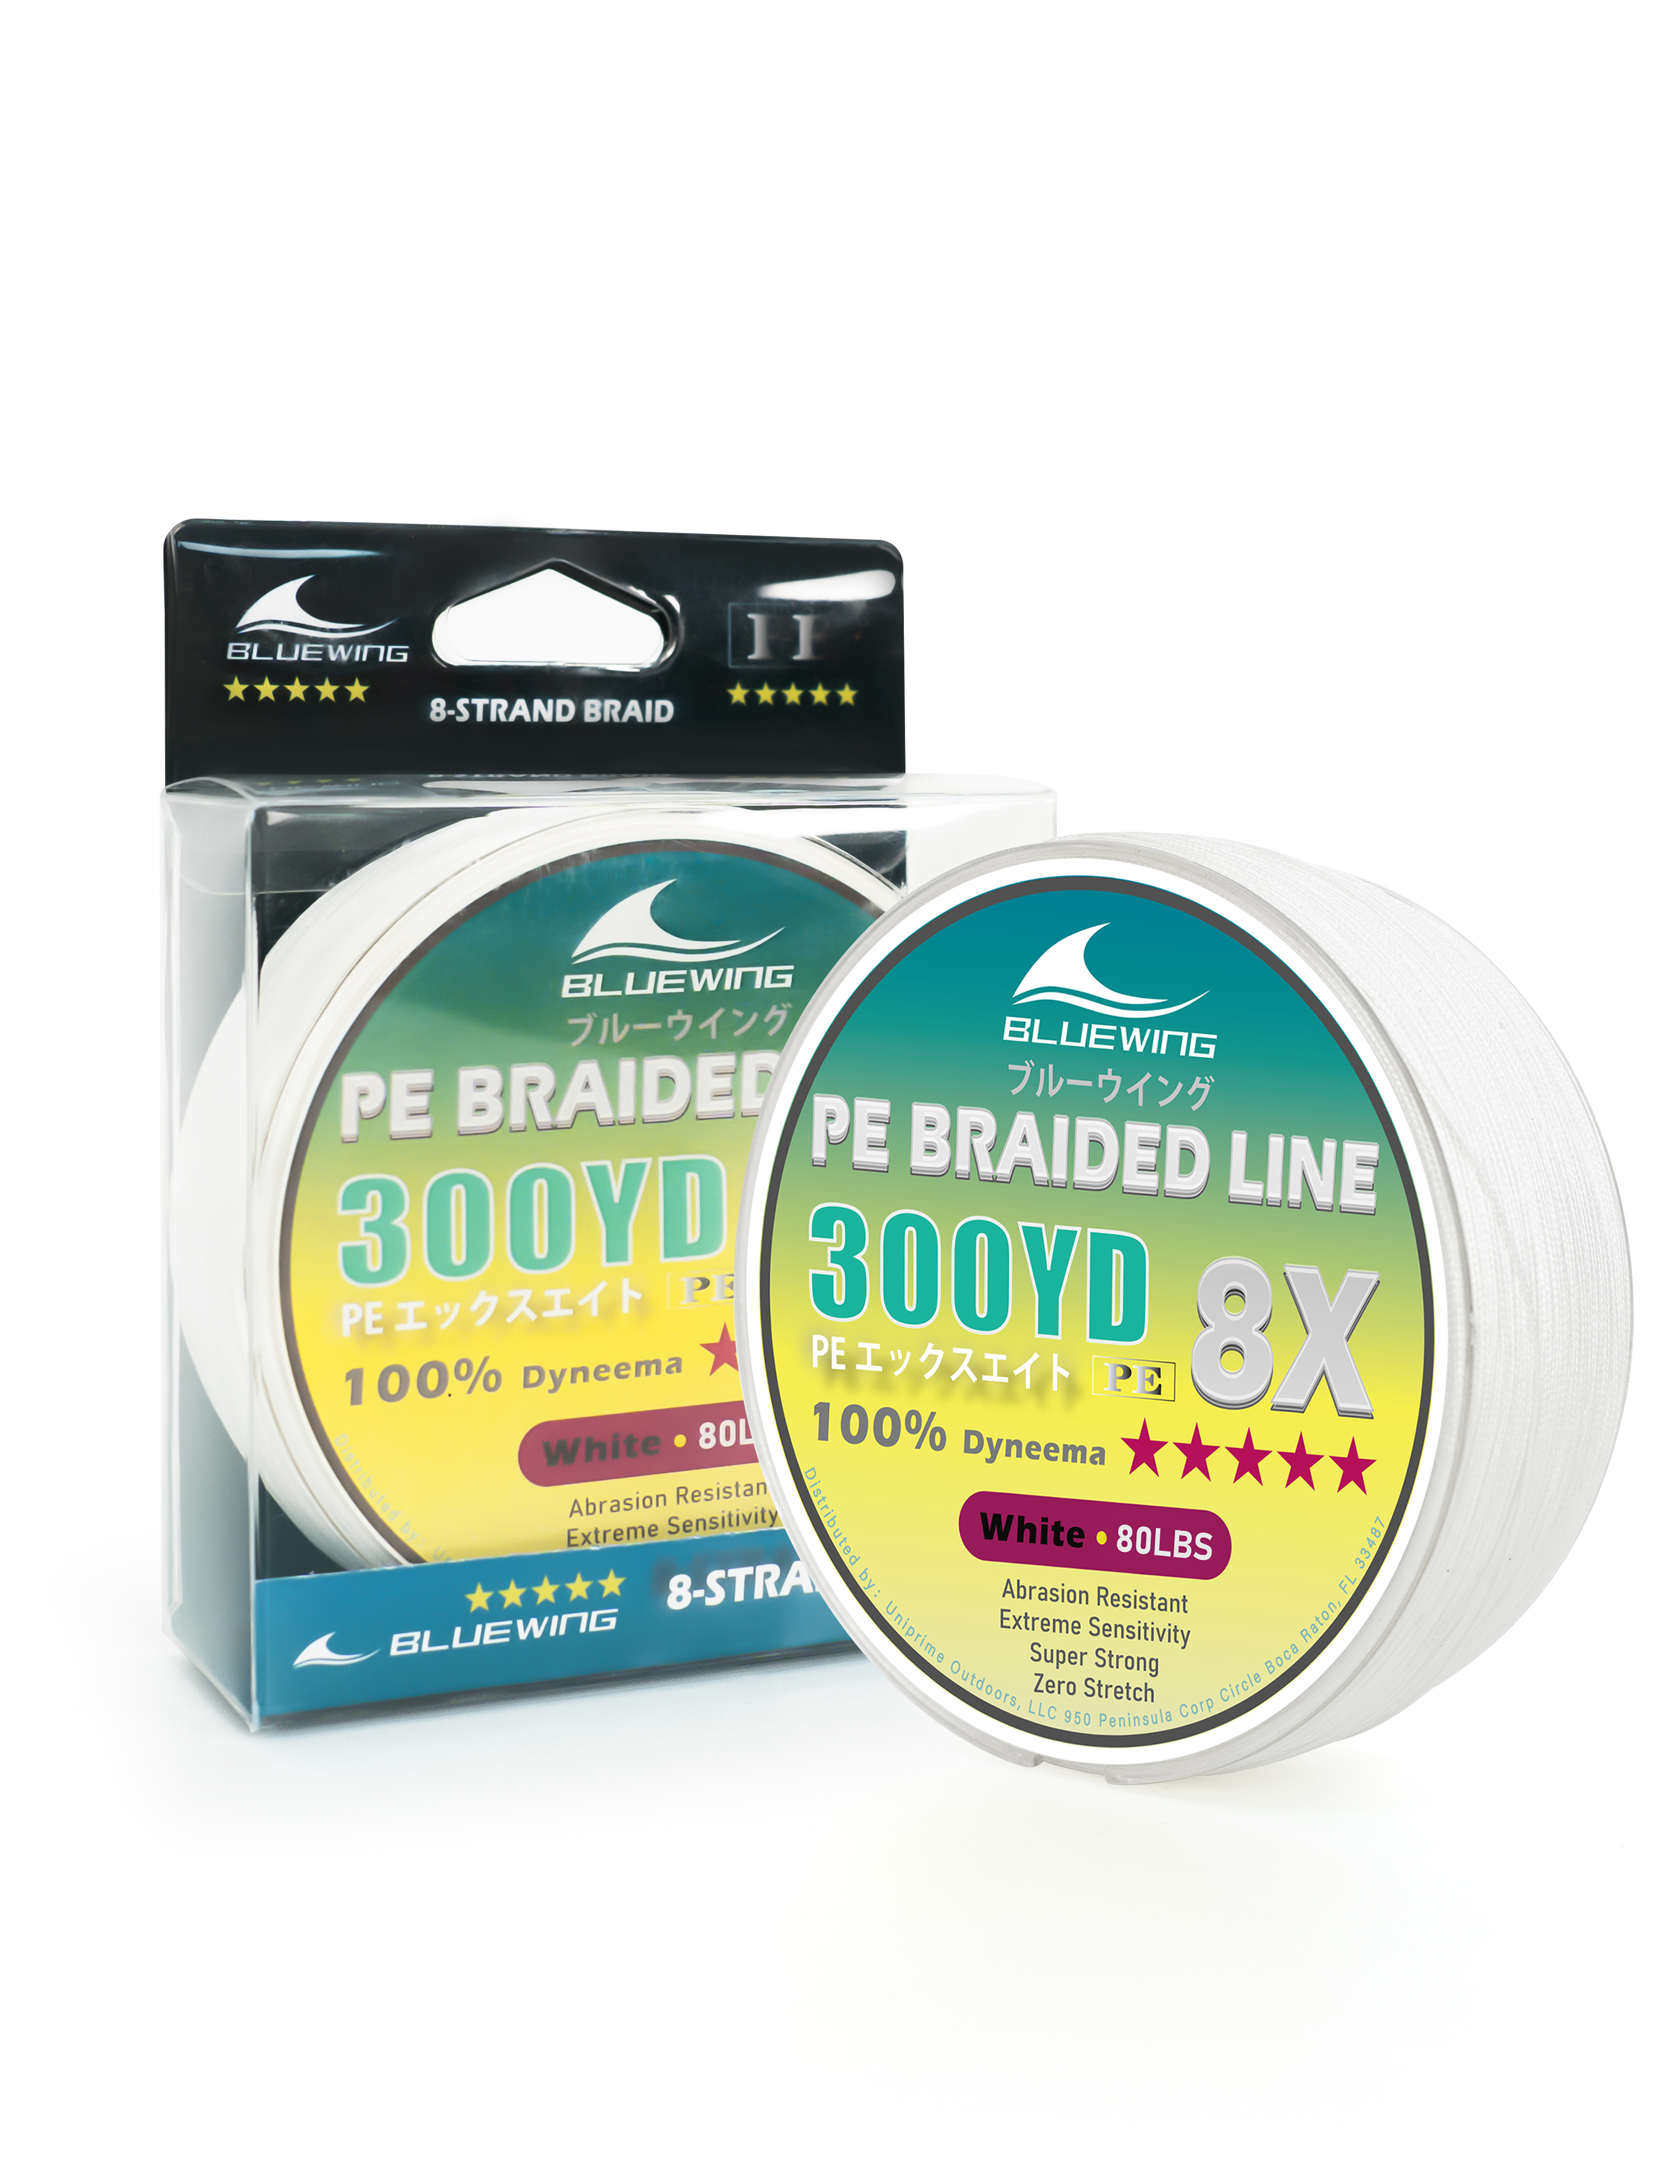 PE Braided Fishing Line 8 Strands For Lure Fishing Suppliers